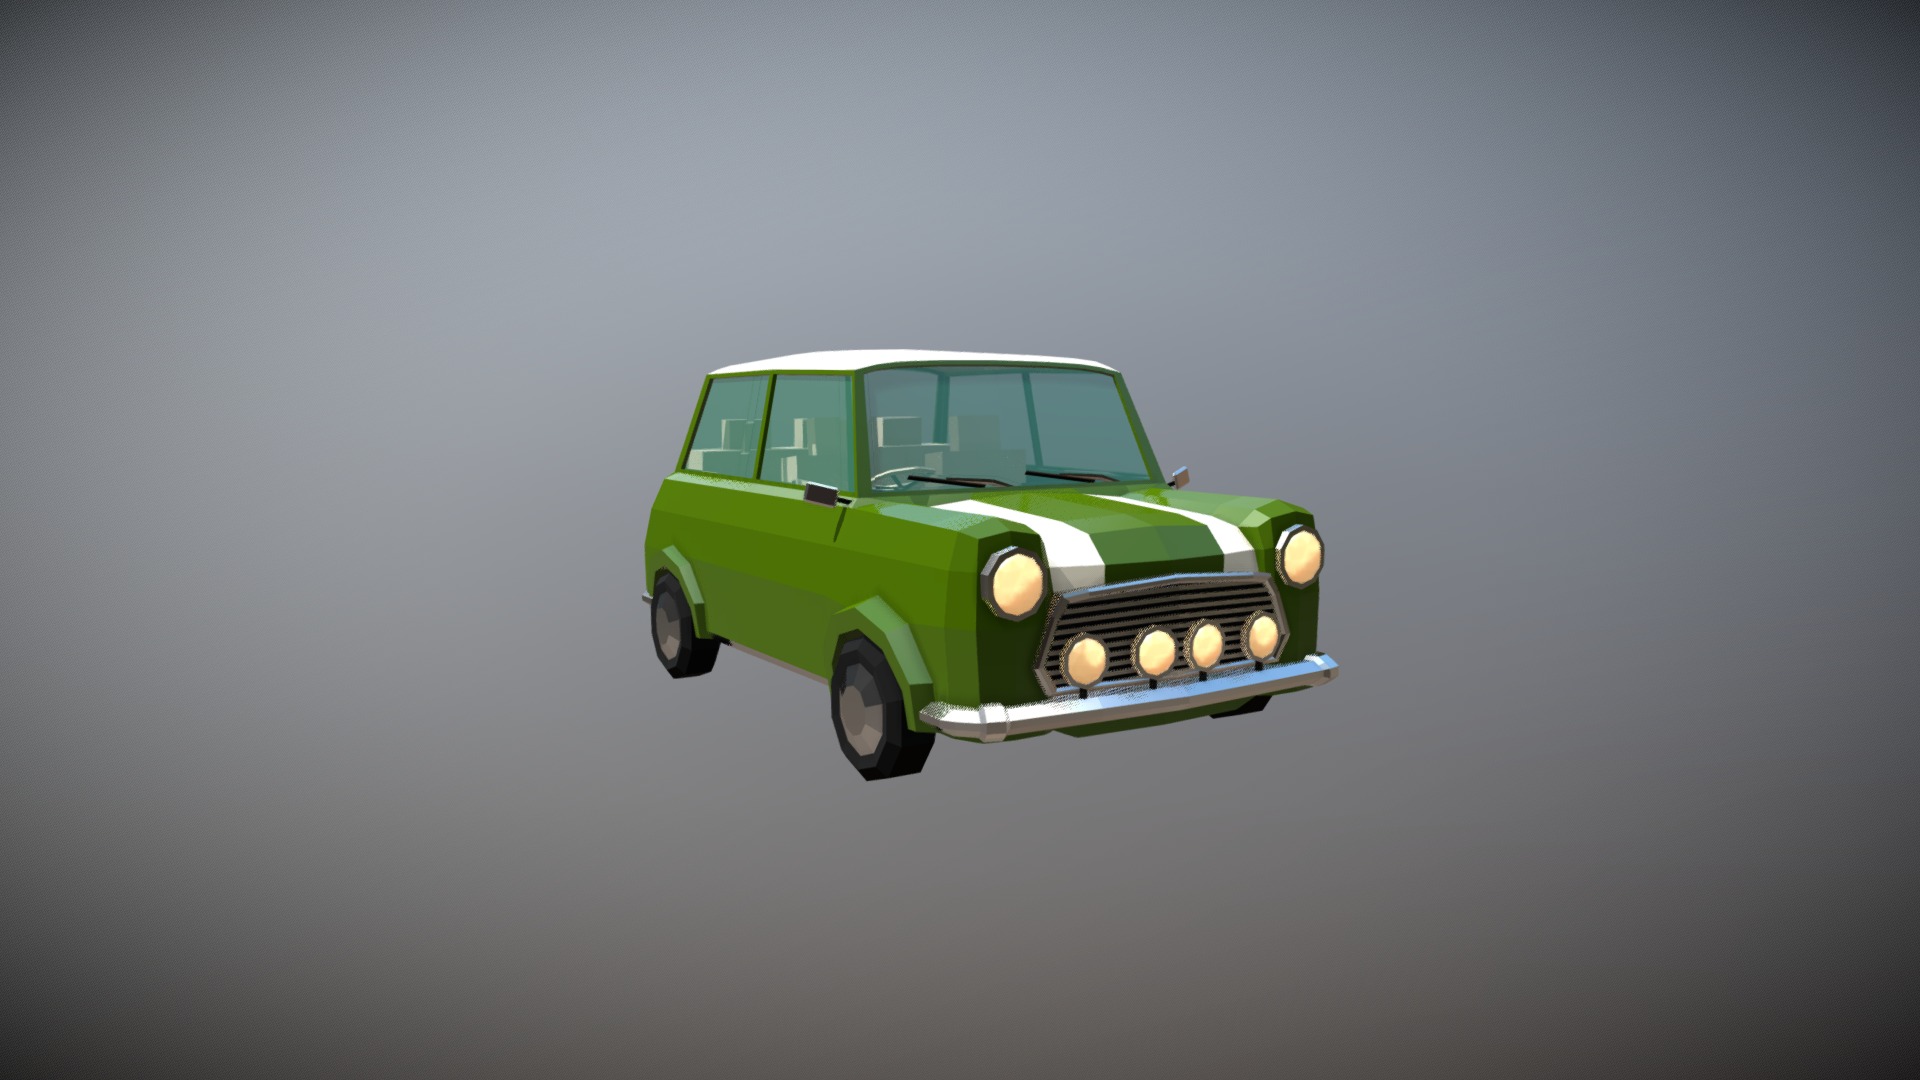 3D model Low Poly City Car 02 - This is a 3D model of the Low Poly City Car 02. The 3D model is about a small green car.